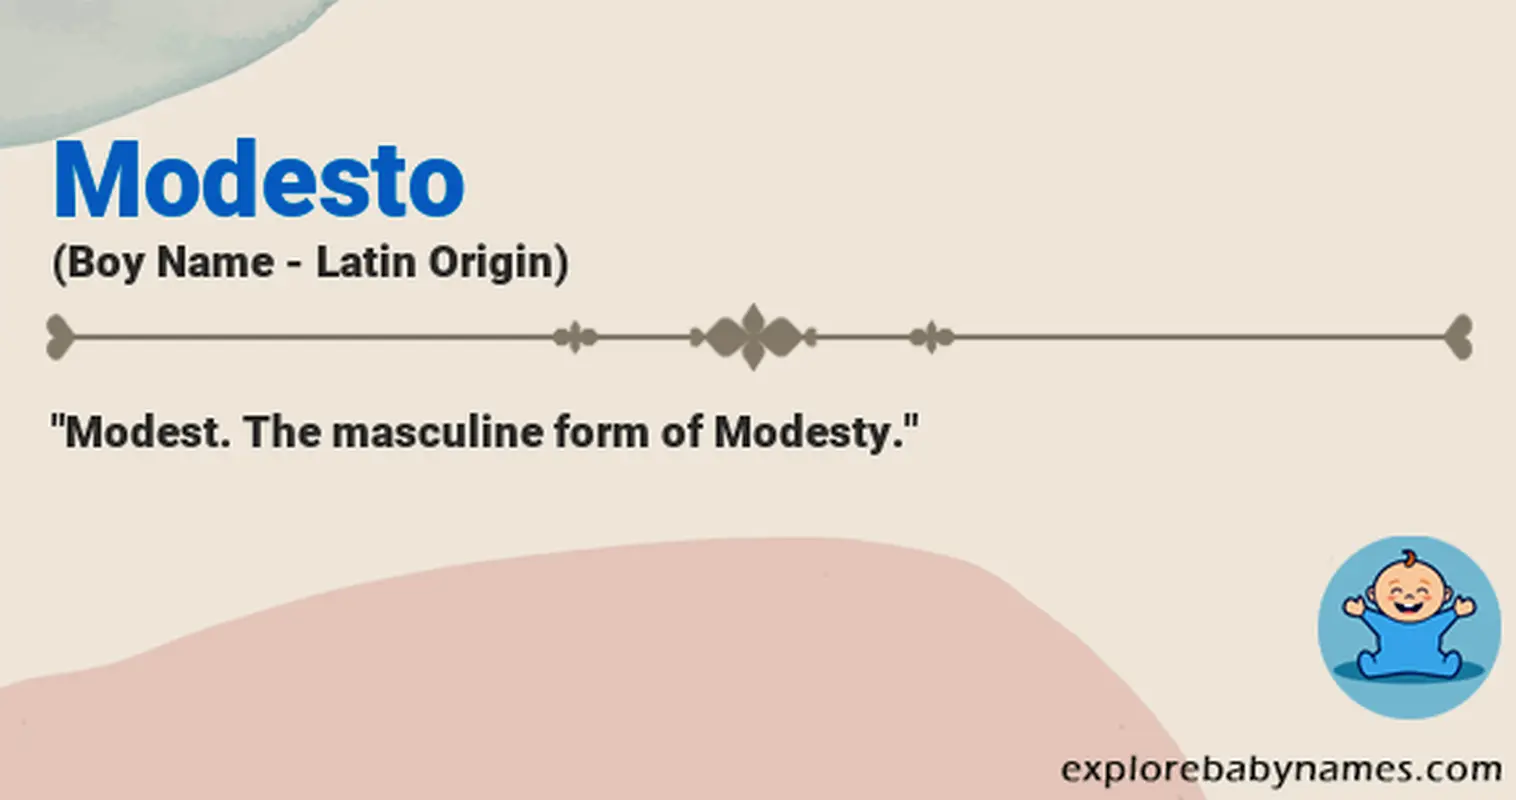 Meaning of Modesto